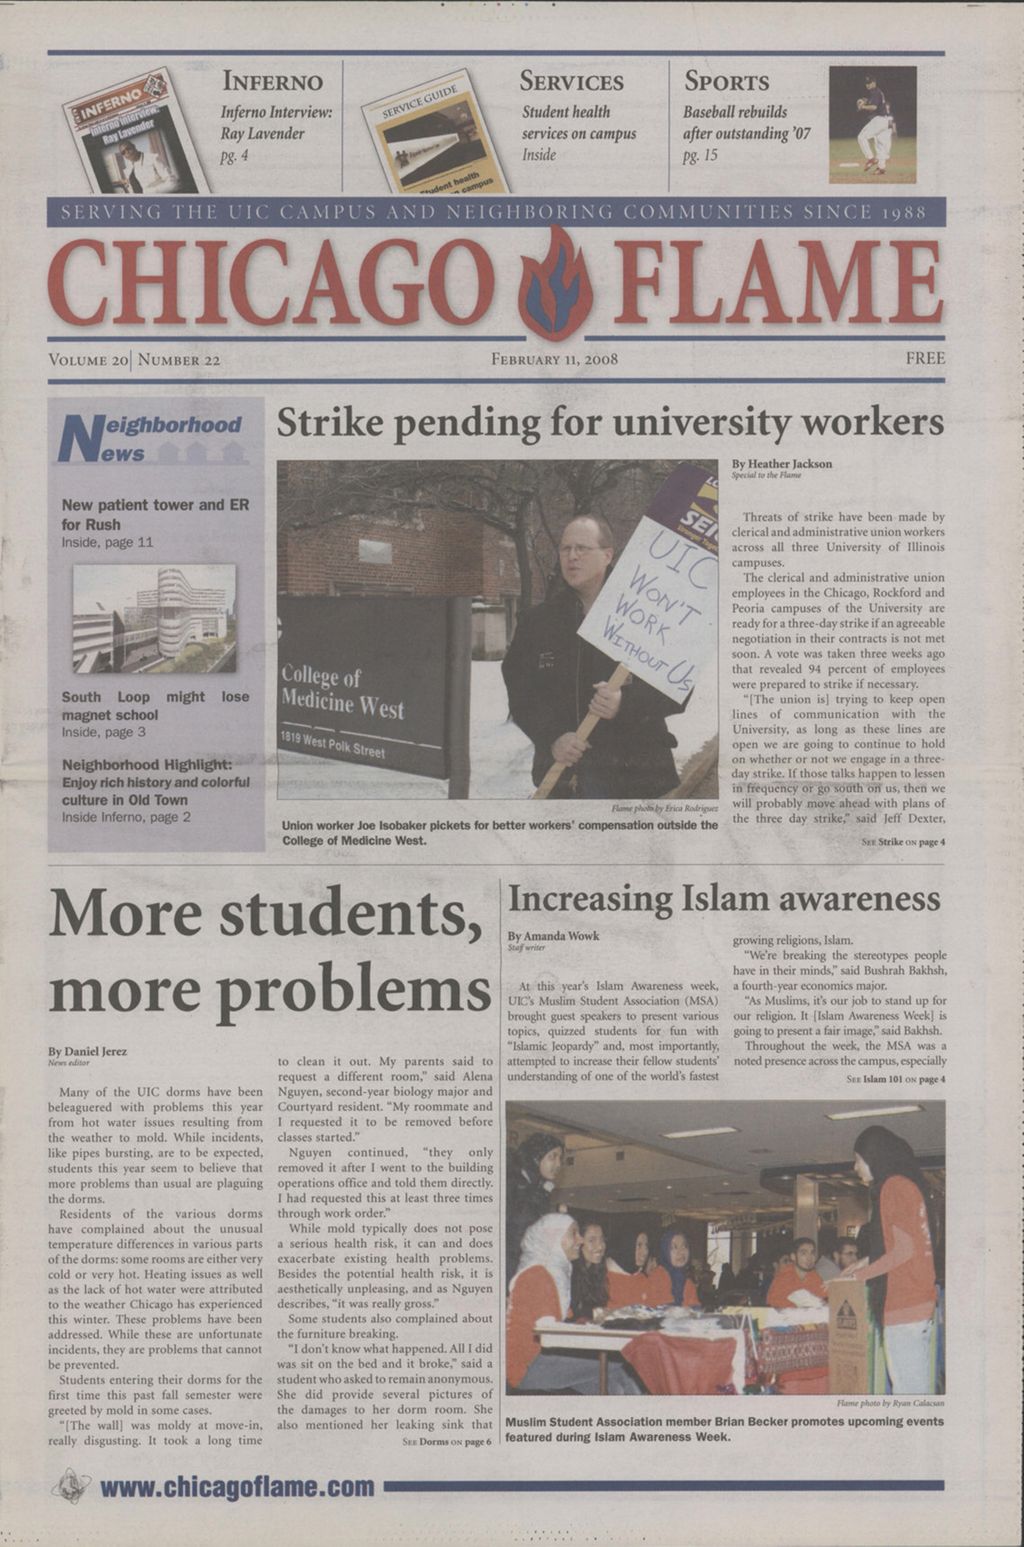 Miniature of Chicago Flame (February 11, 2008)